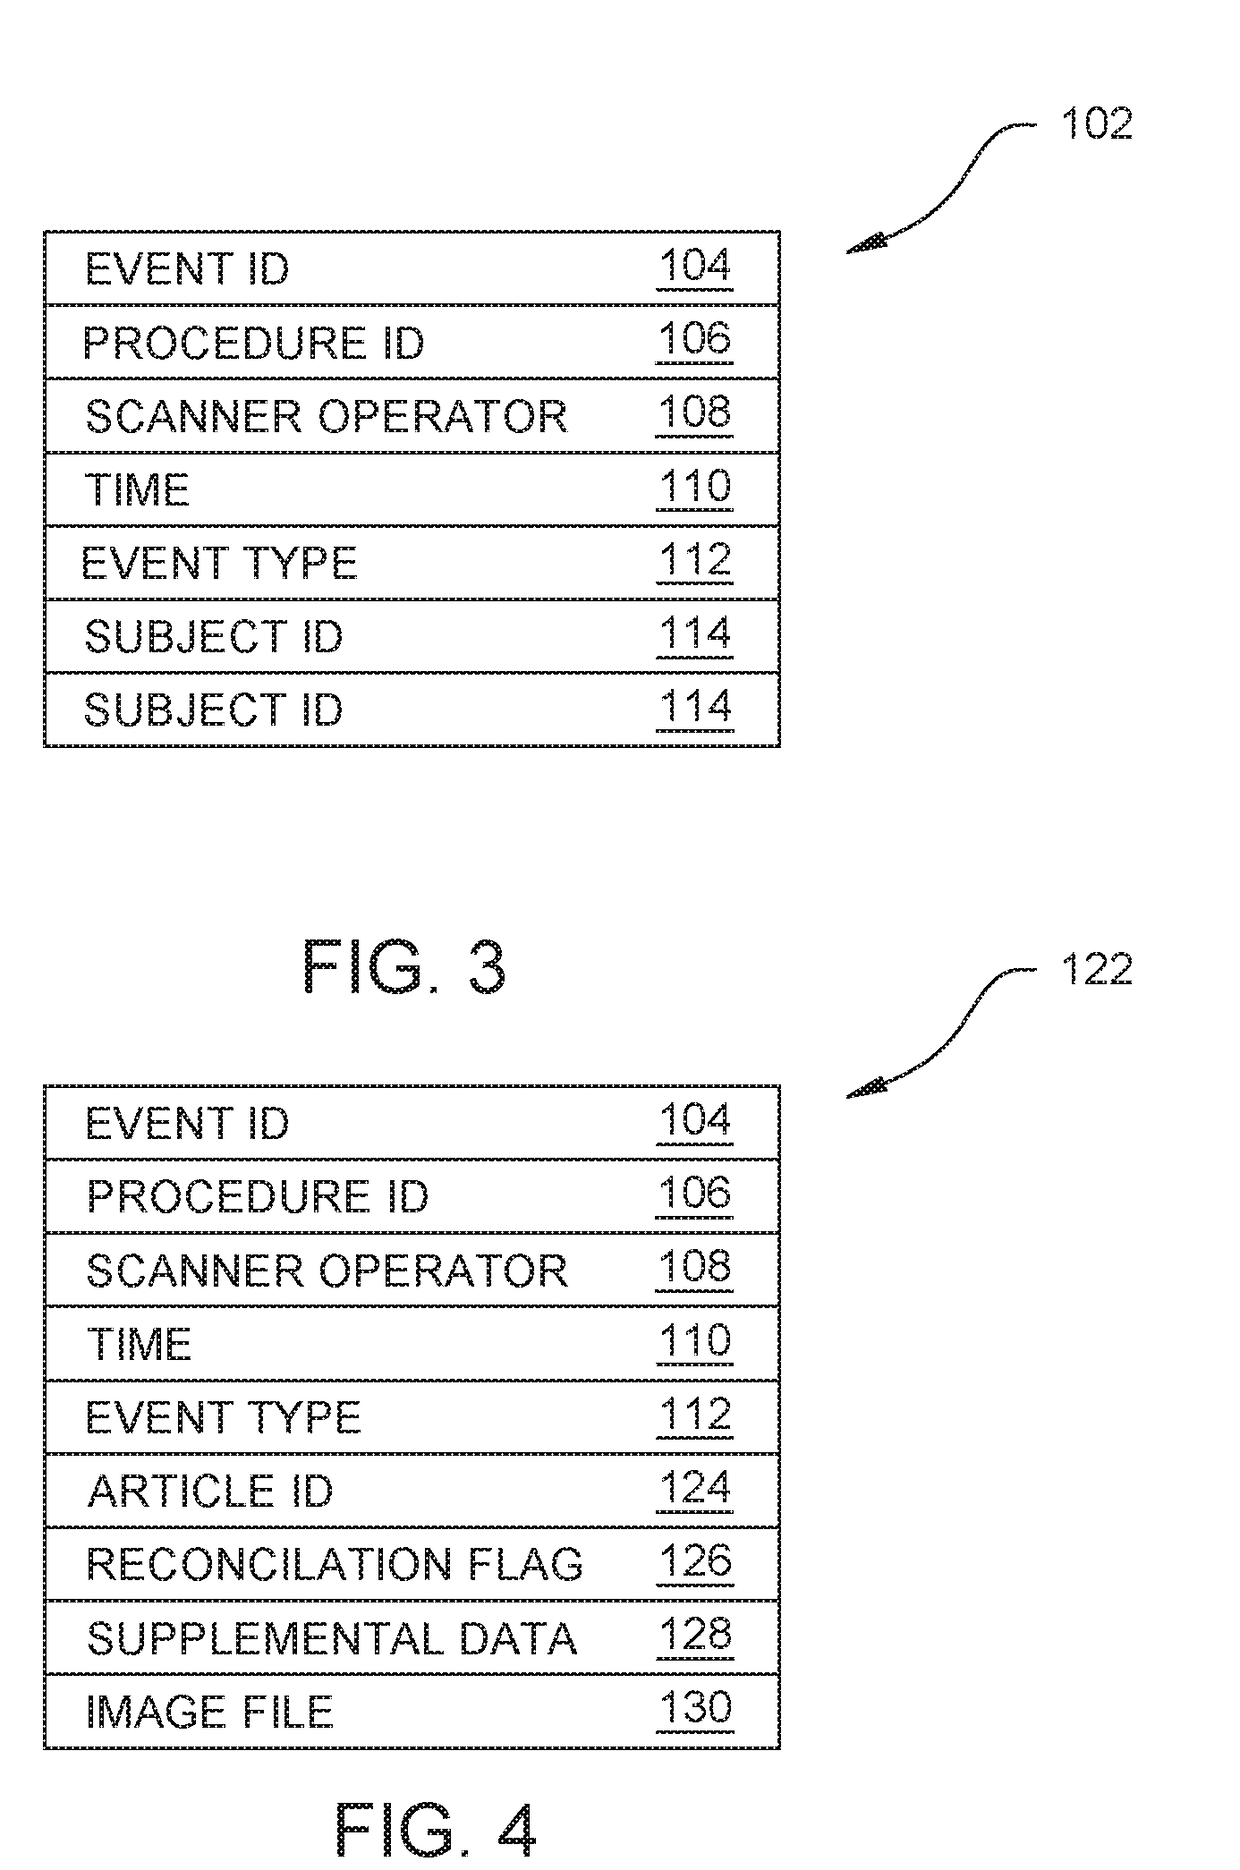 System And Method For Recording Events That Occur During A Medical Procedure, Including Events Associated With The Inventorying Of Articles Used During The Procedure